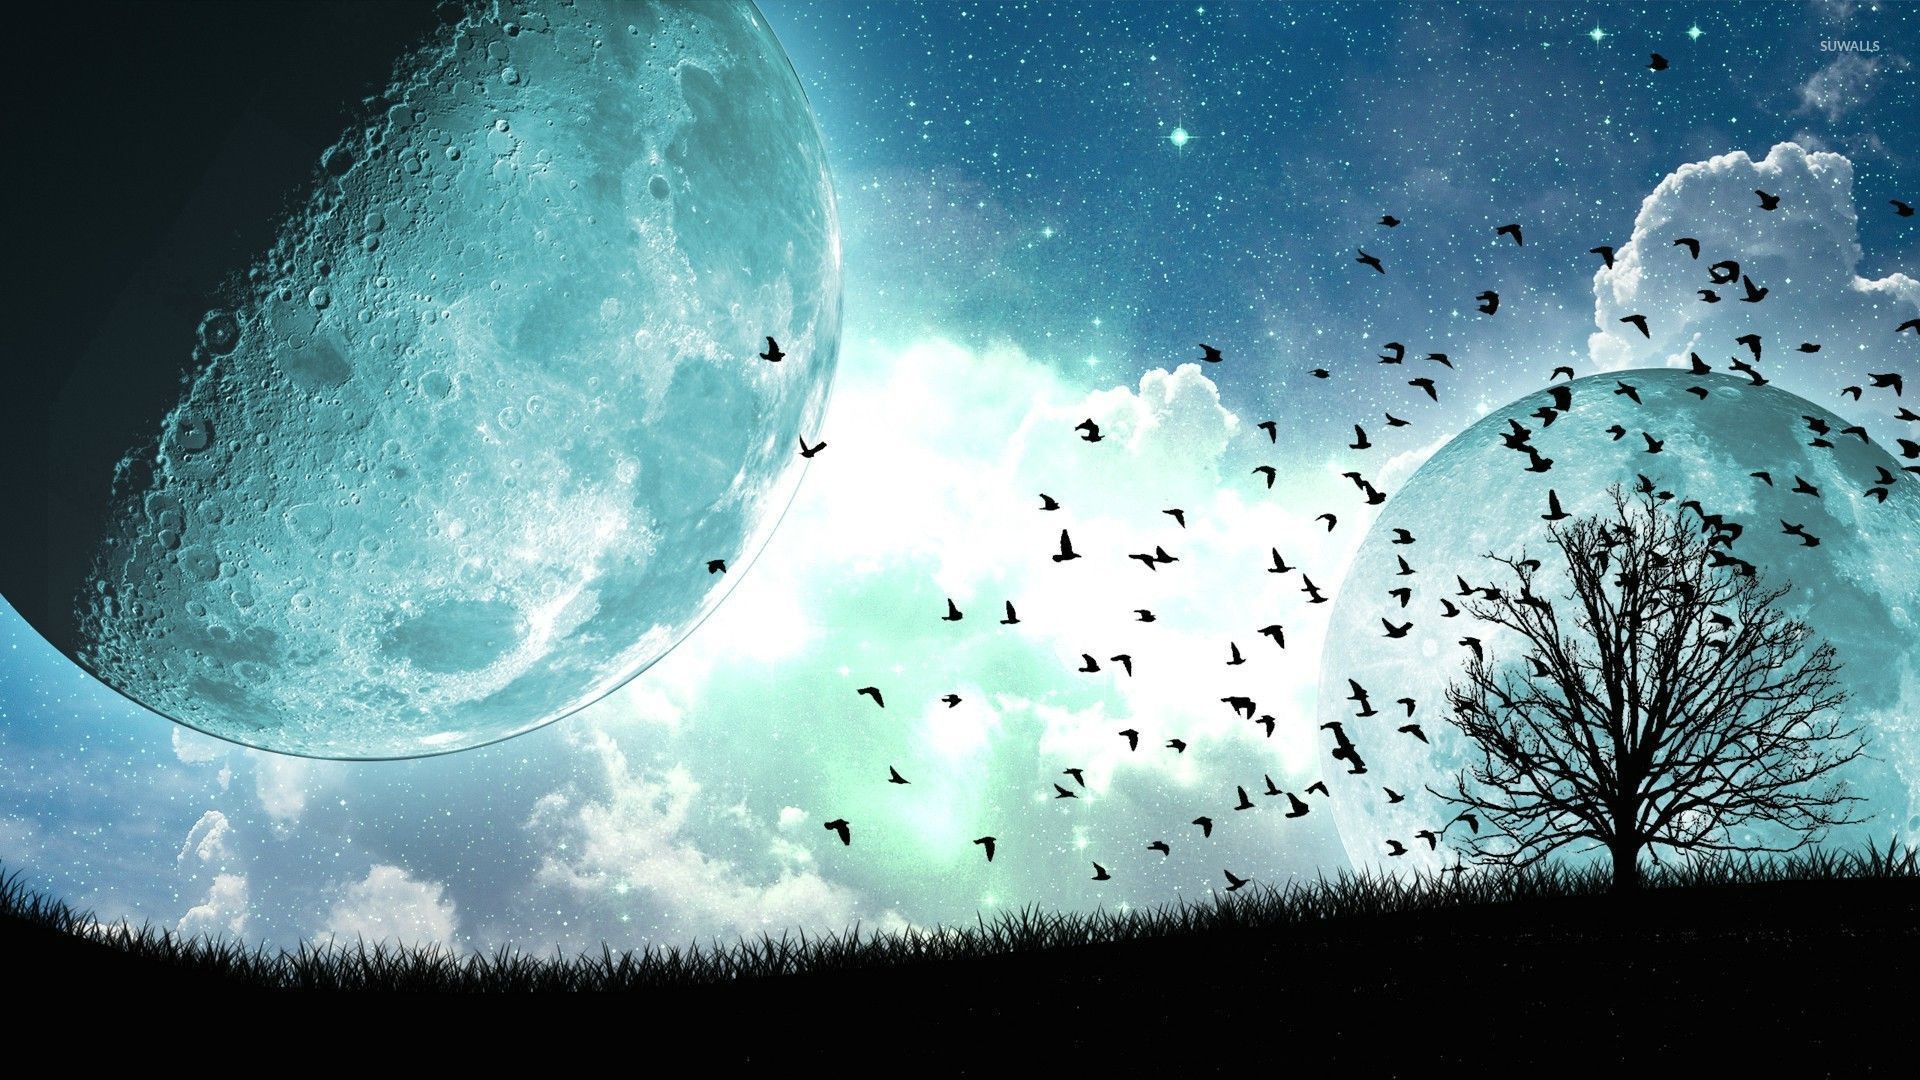 Birds and tree under the blue moon wallpaper